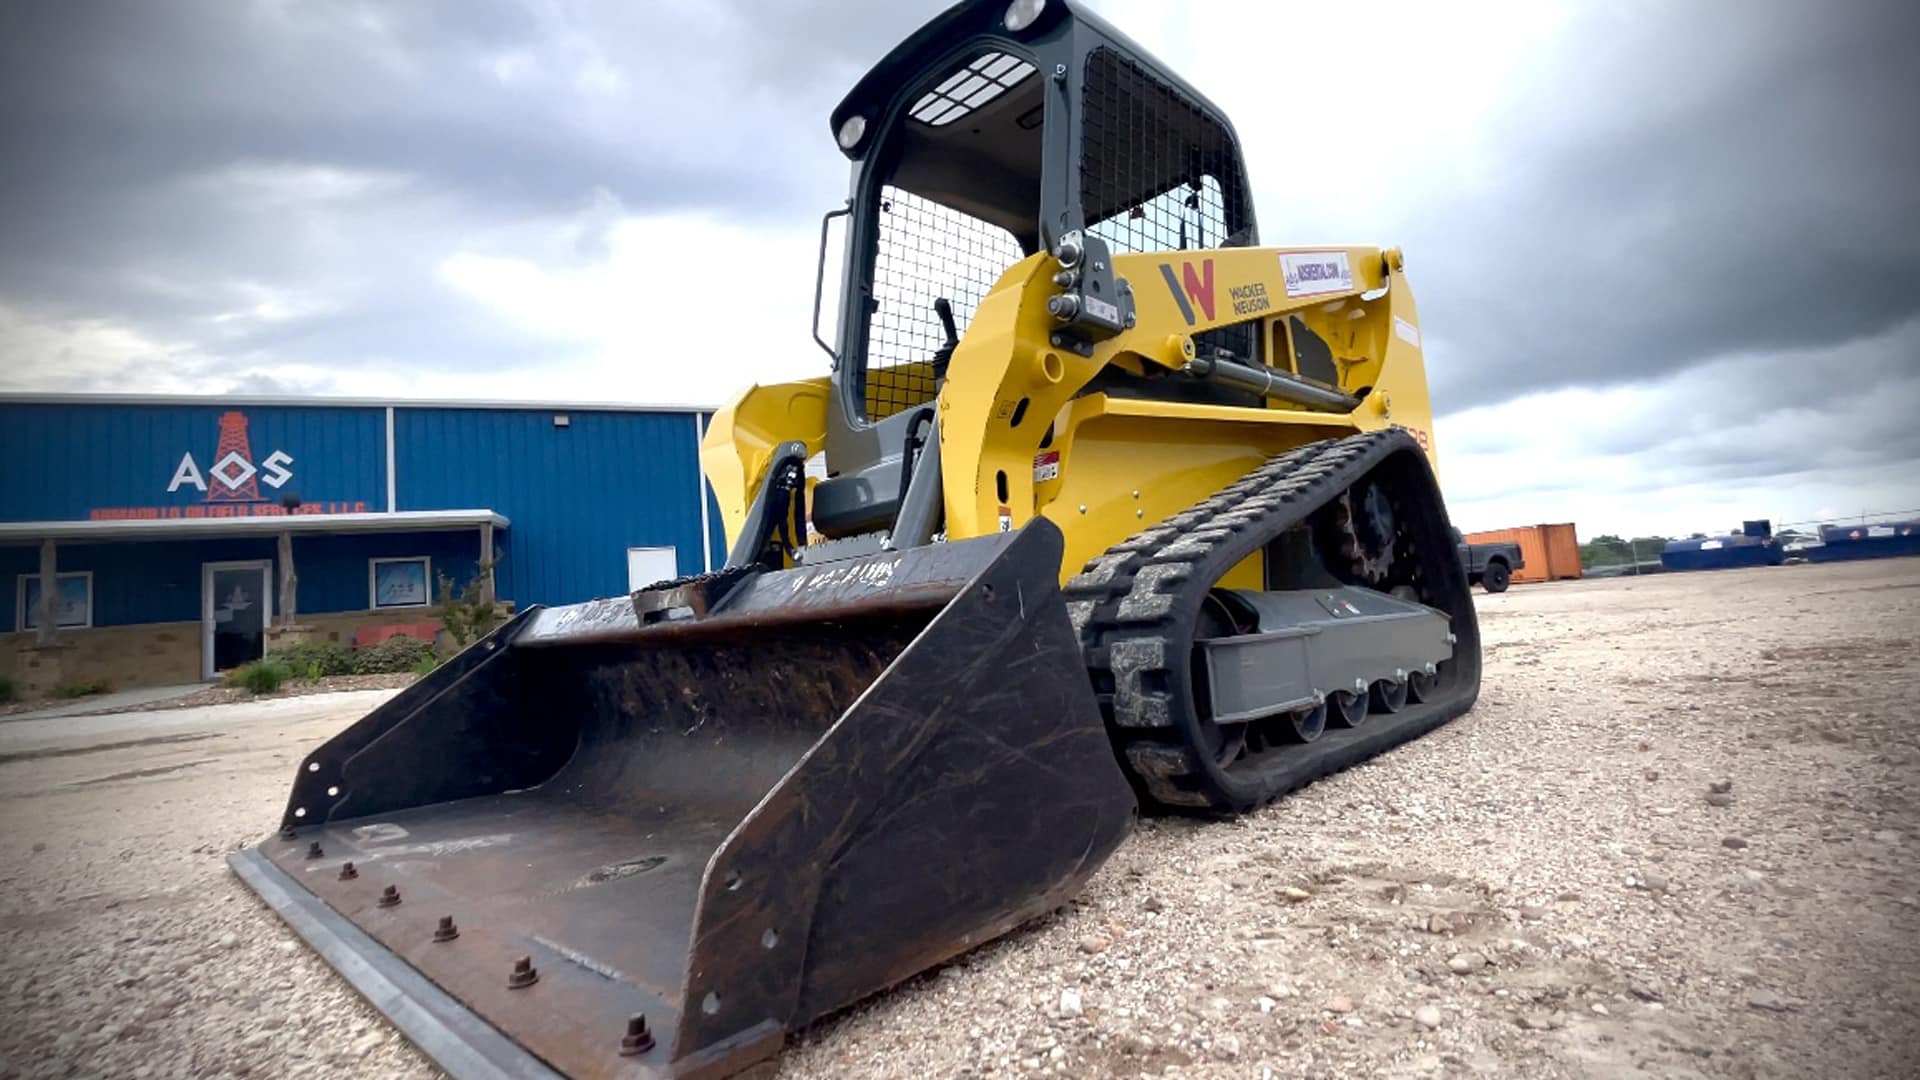 Yellow skid steer compact track loader in the parking lot